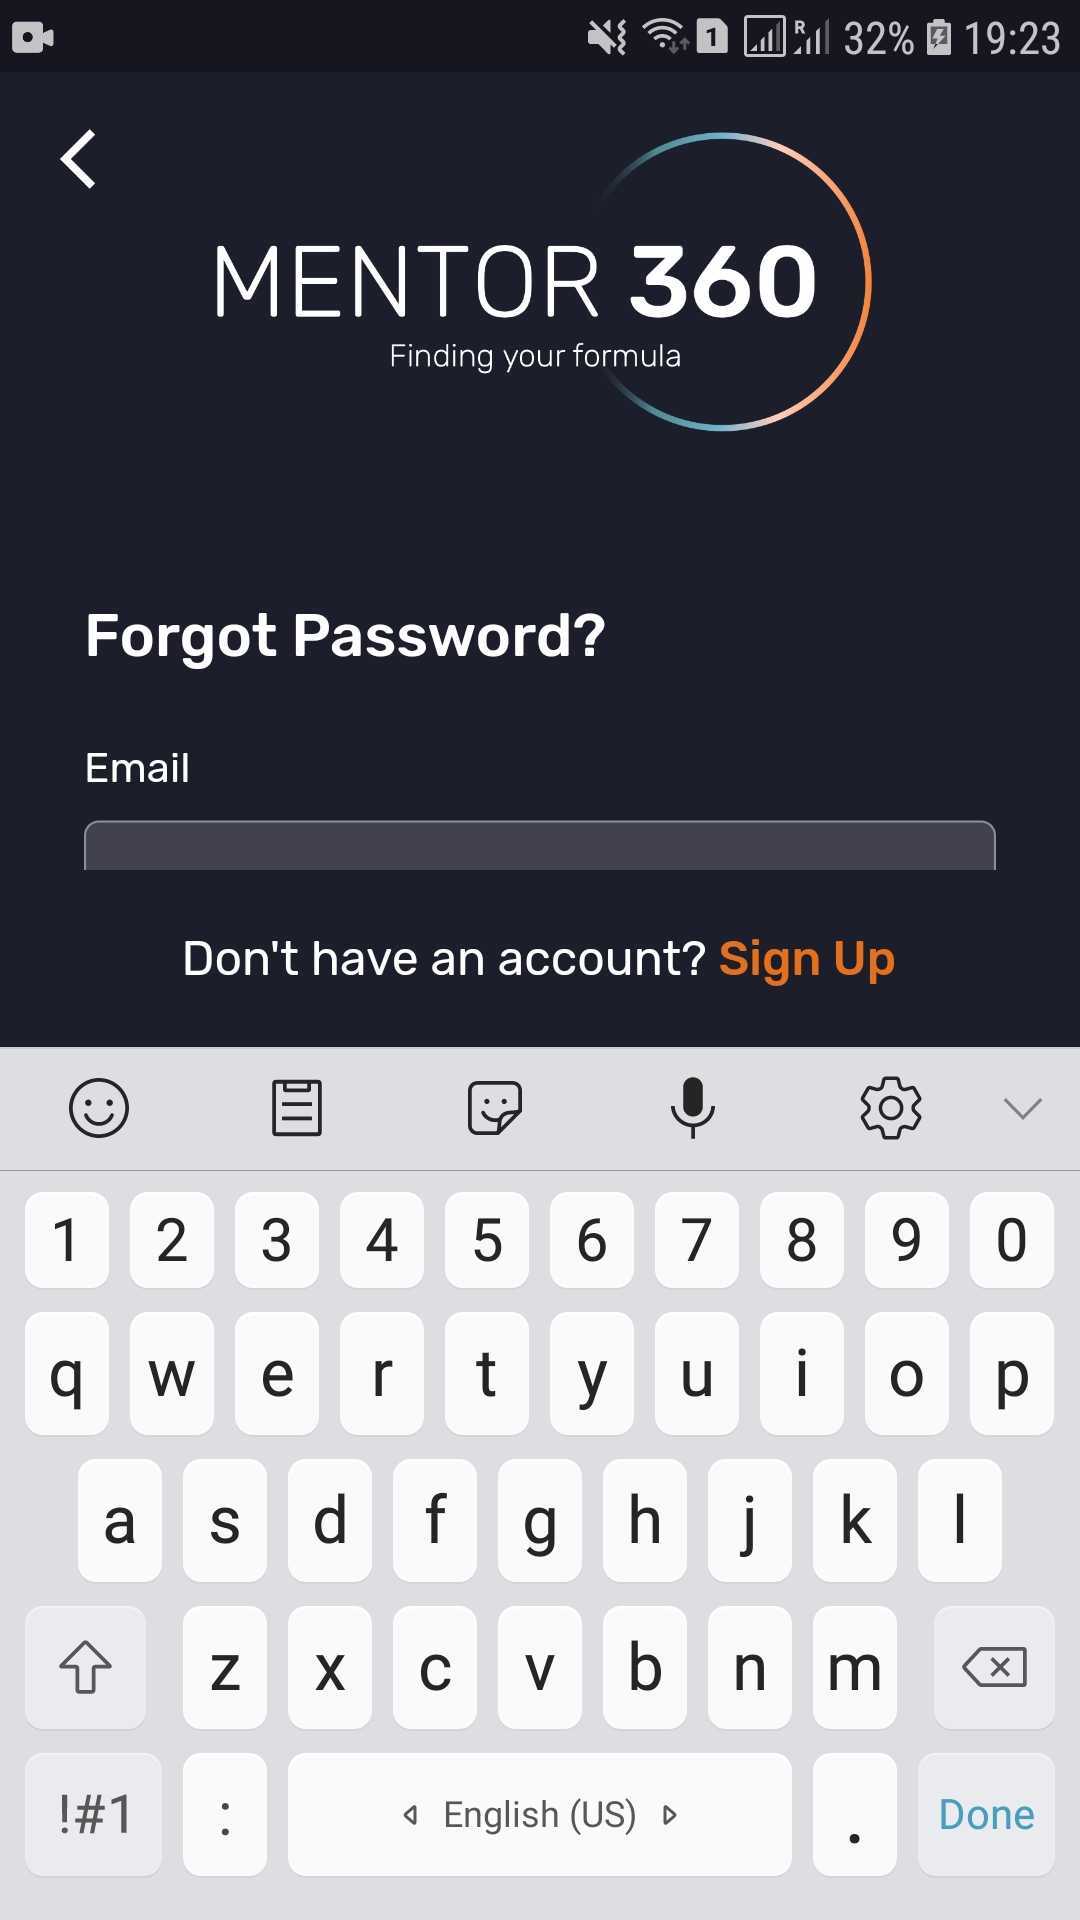 Mobile keyboard overlaps “Email” input and “Reset Password” button